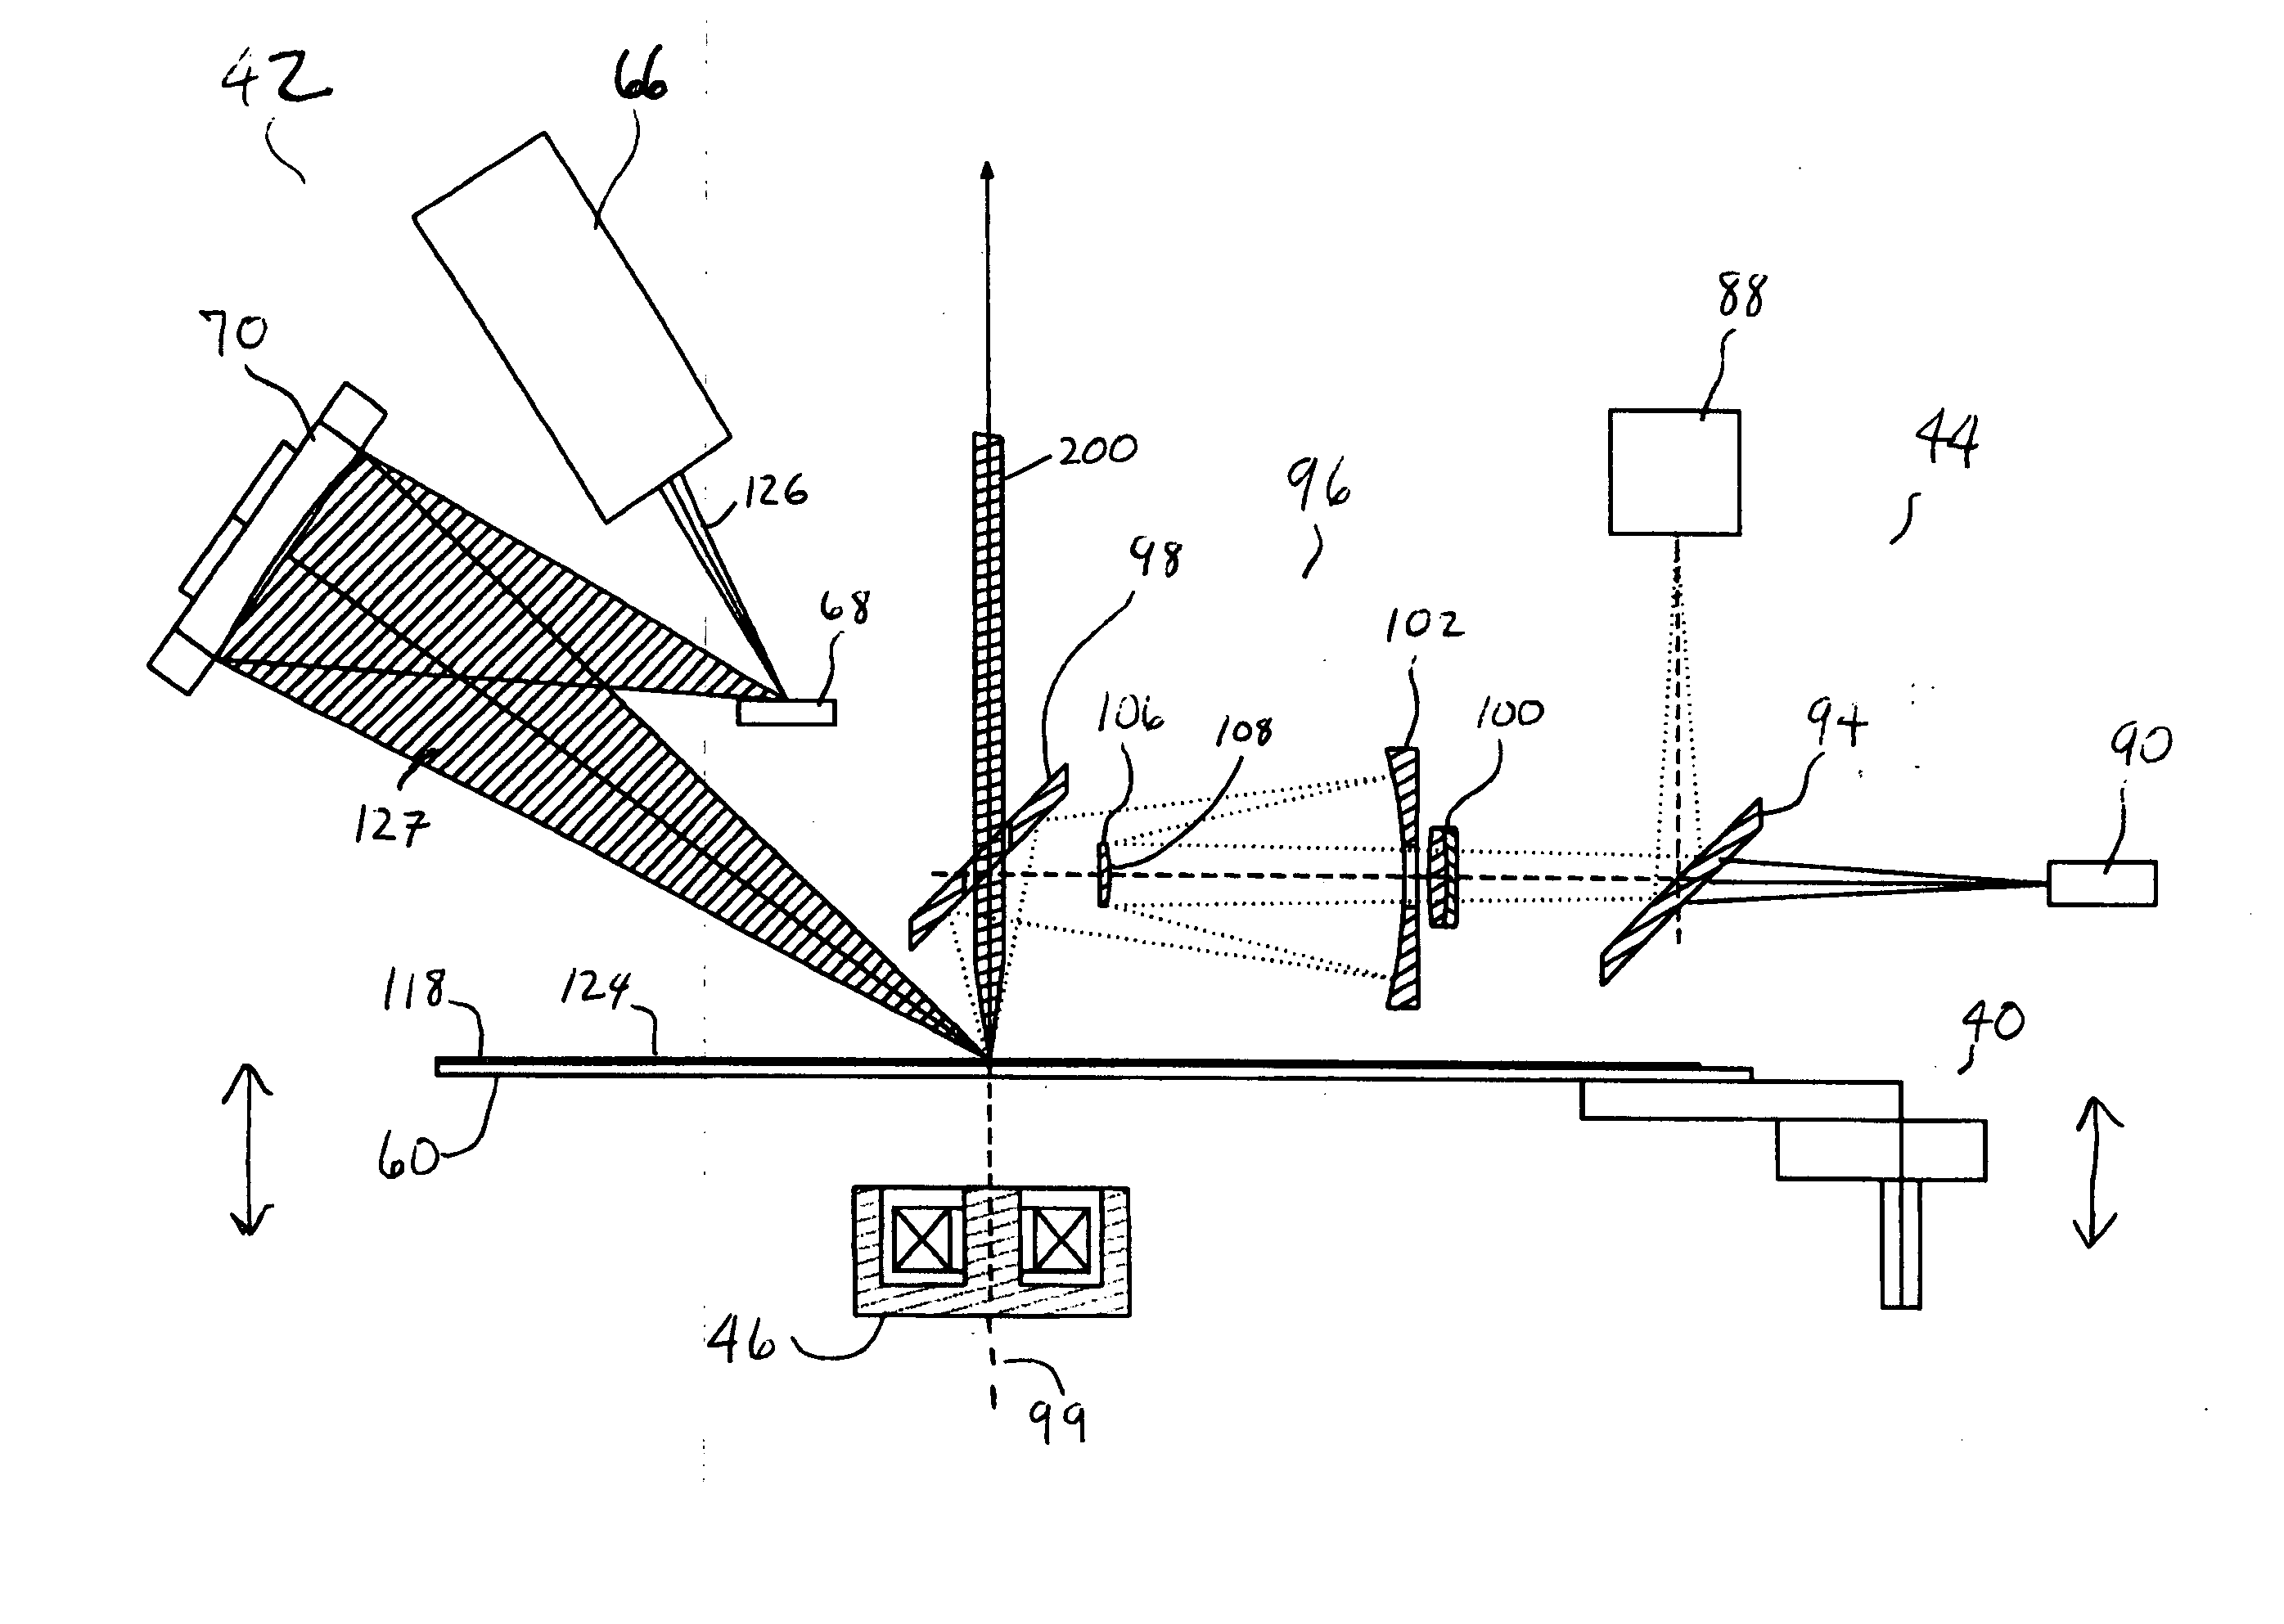 Photoelectron spectroscopy apparatus and method of use